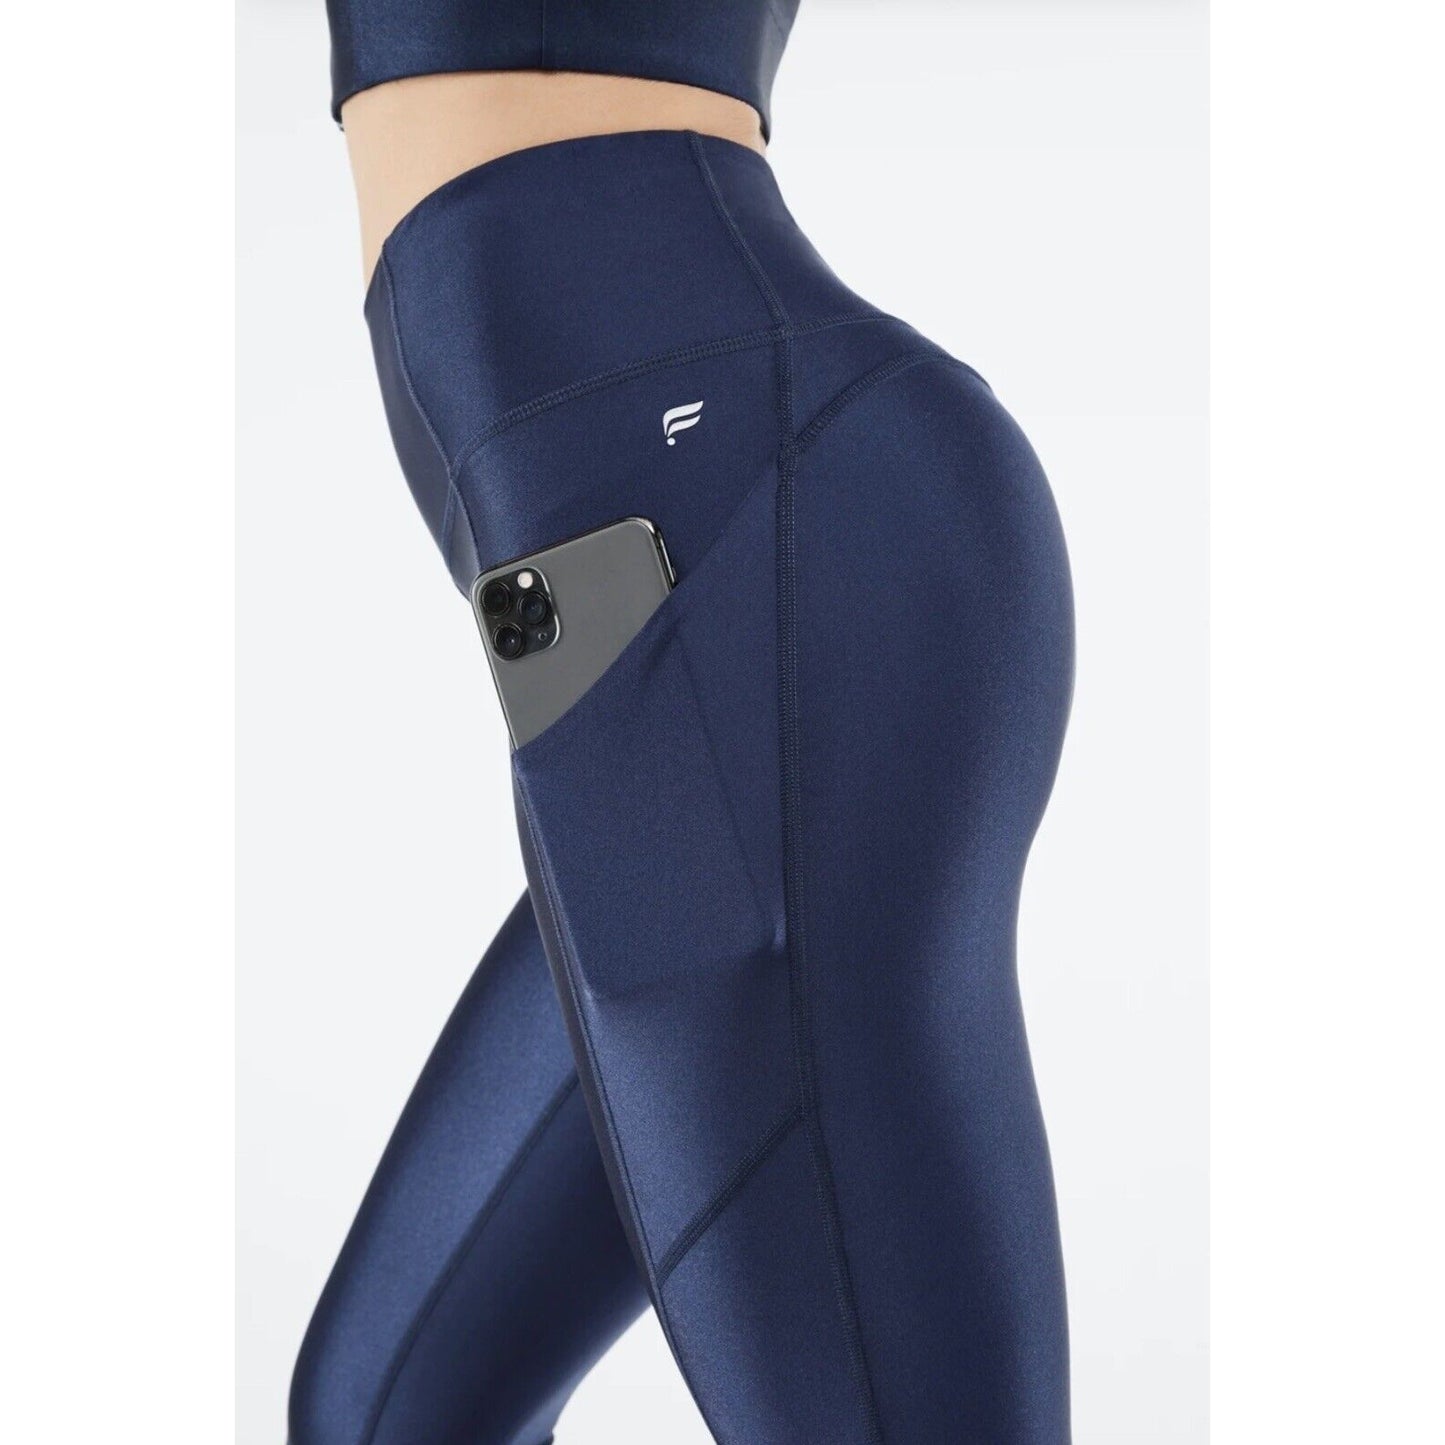 Fabletics Oasis PureLuxe High-Waisted Shine Legging